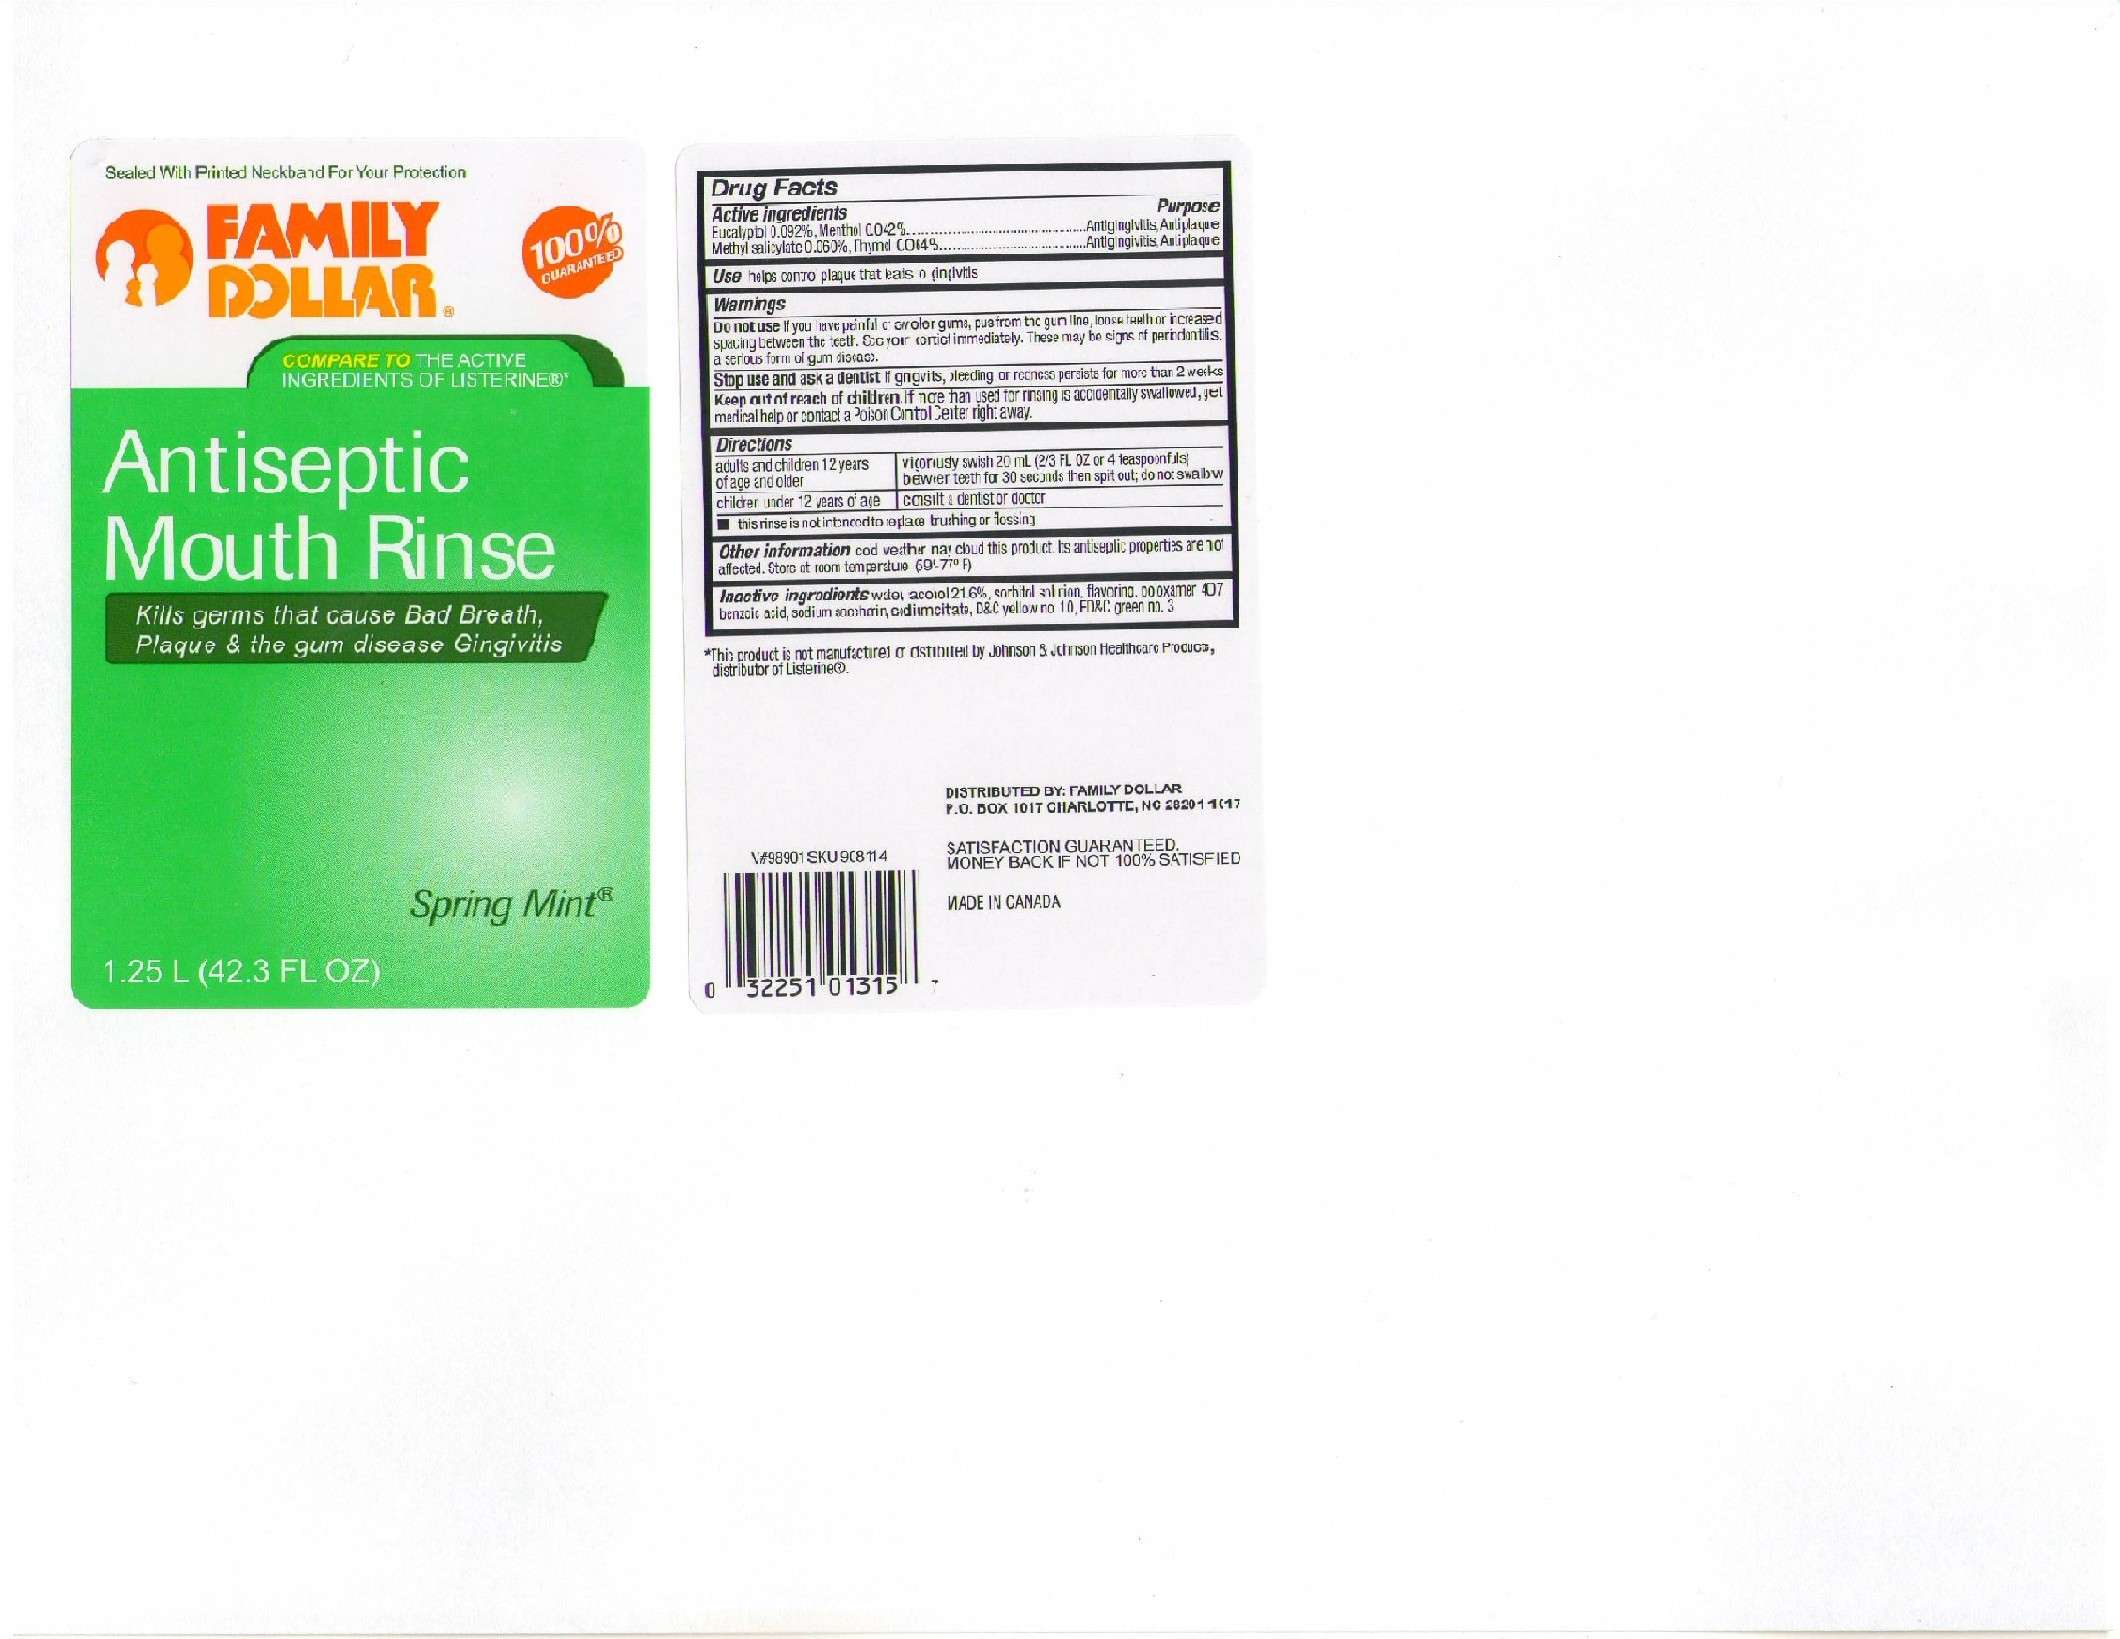 Family Dollar Antiseptic Mouth Rinse Spring Mint